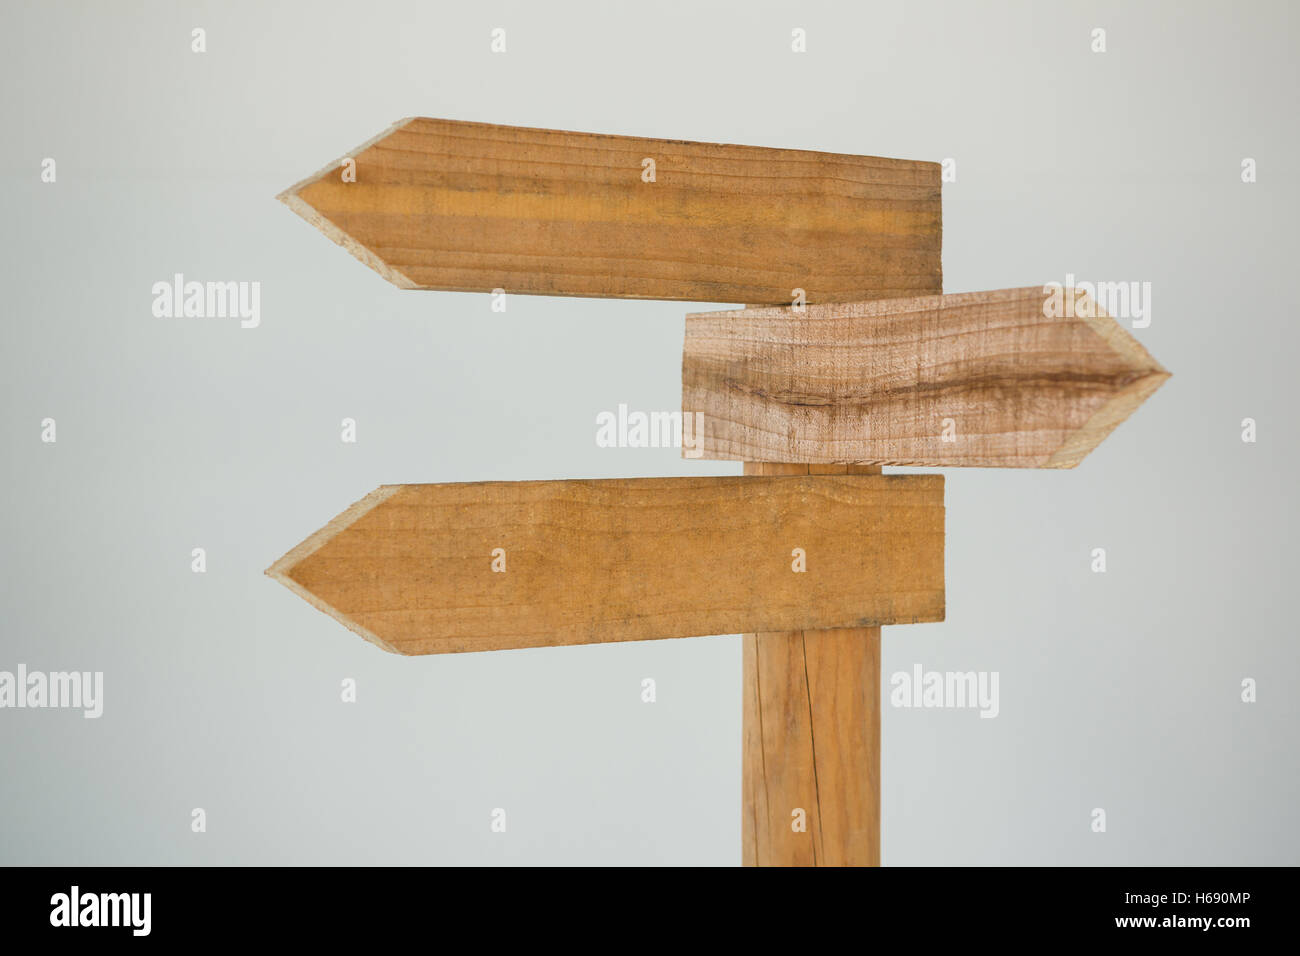 Wooden arrow direction sign post Stock Photo